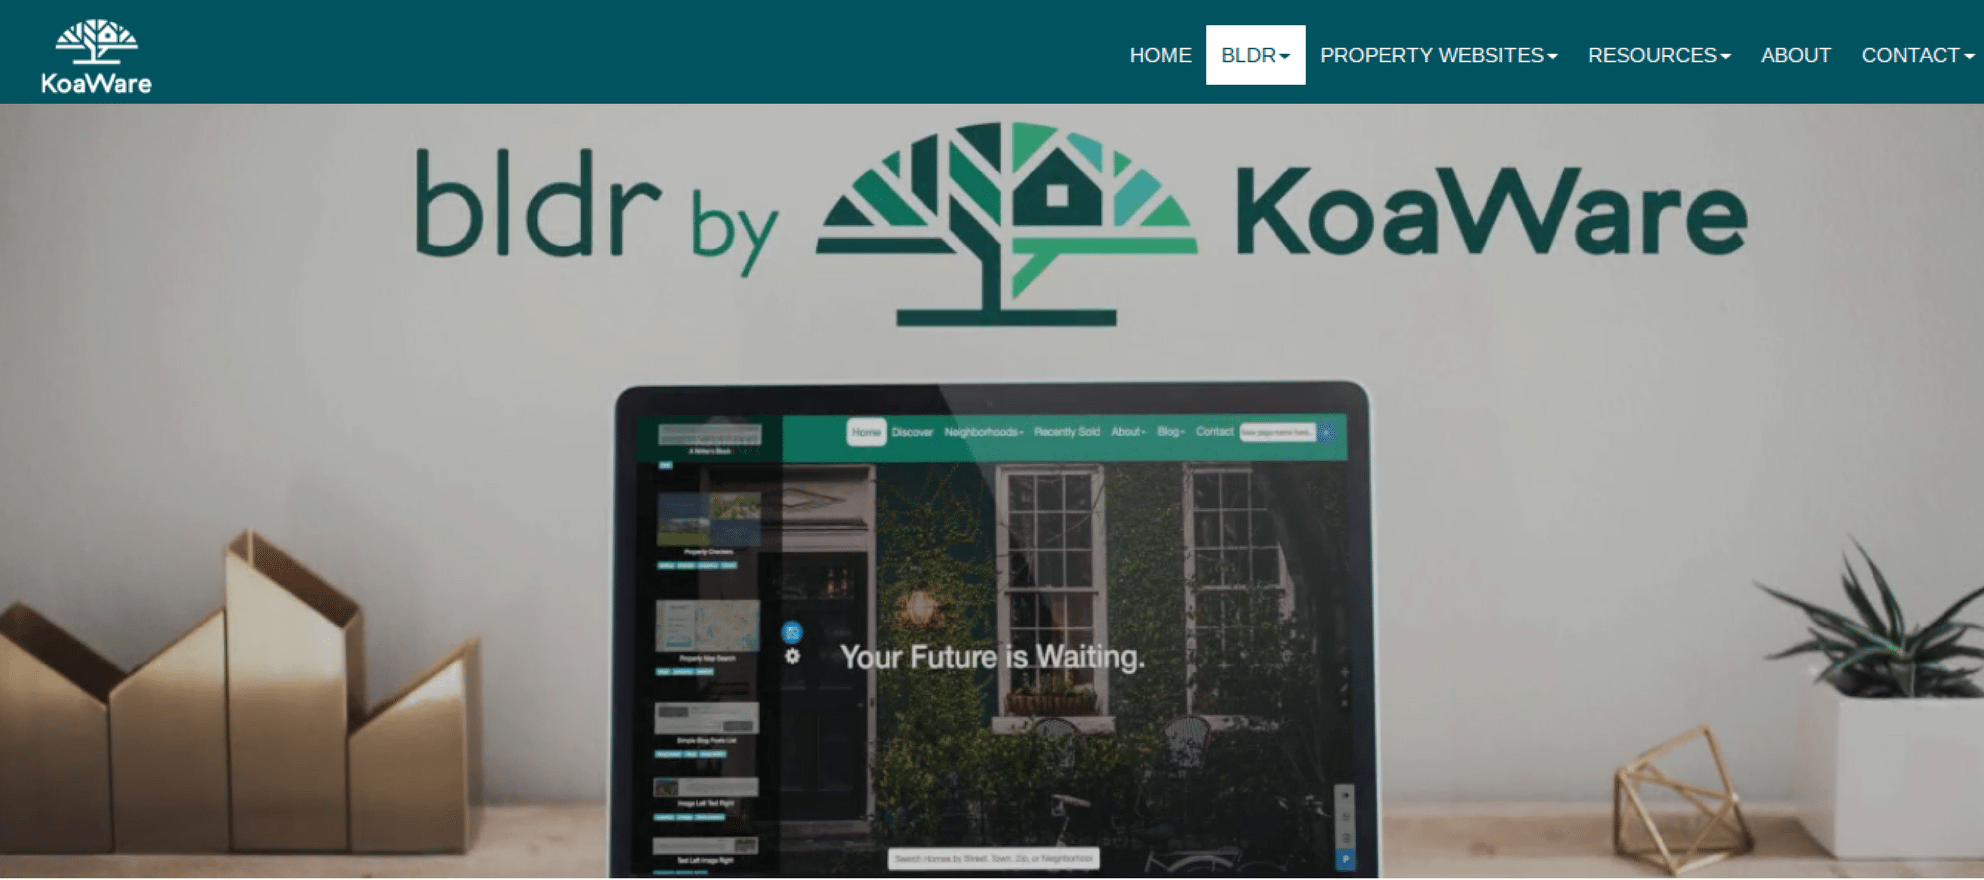 Construct your web presence with KoaWare's drag-and-drop website 'bldr'